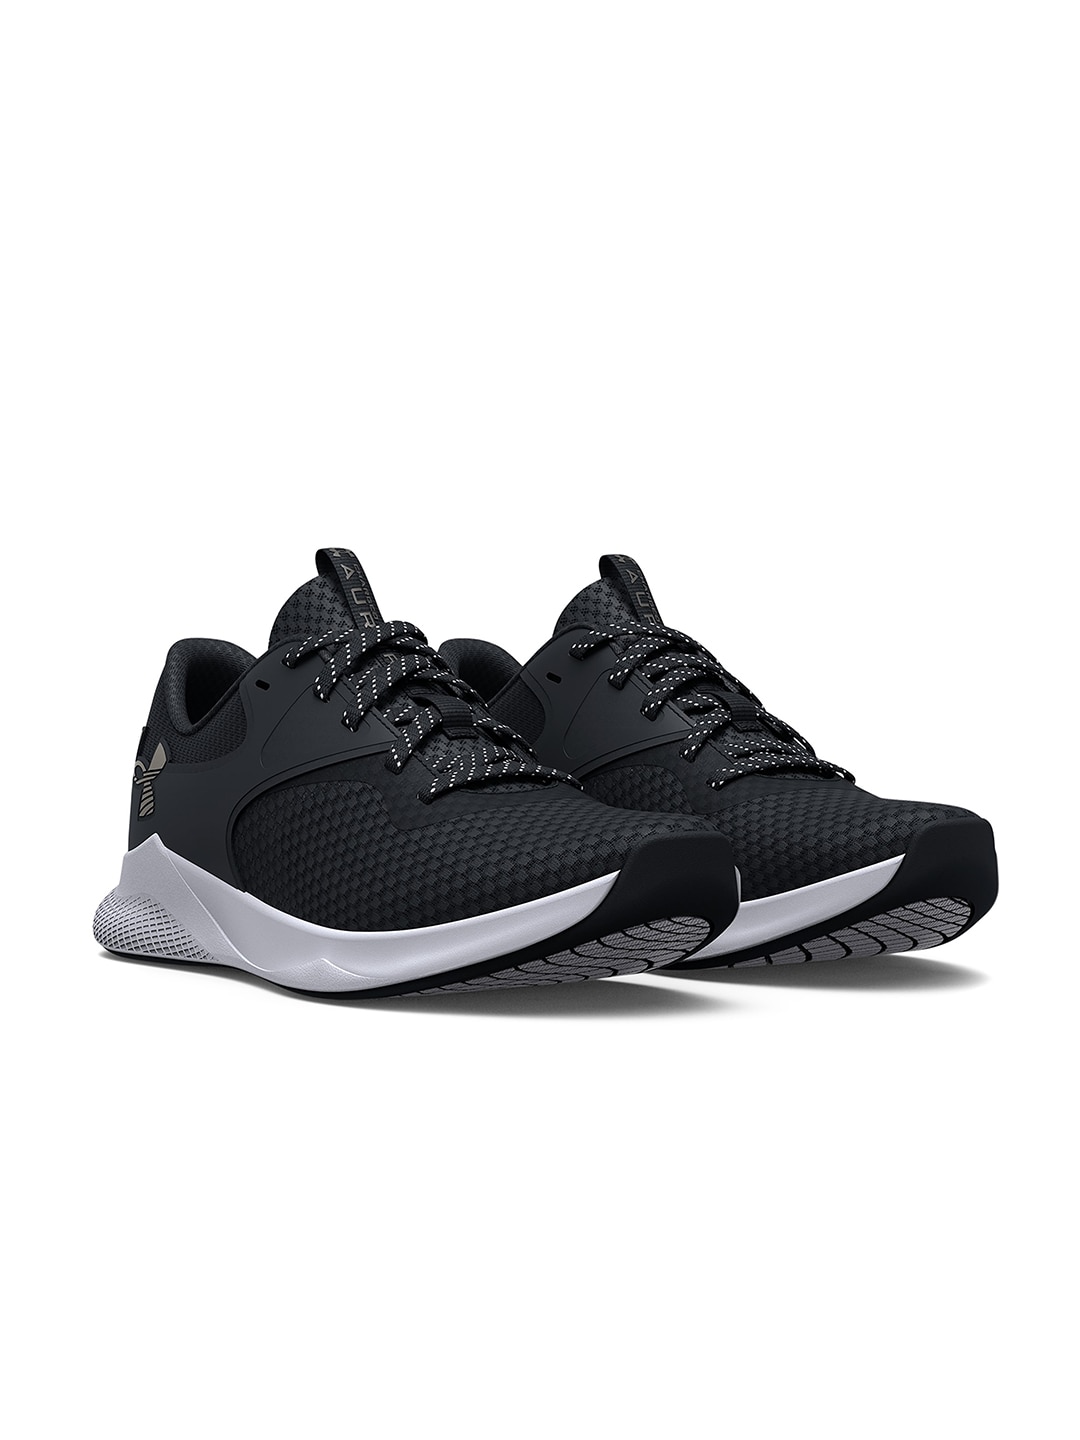 UNDER ARMOUR Women Black Charged Aurora 2 Training Shoes Price in India